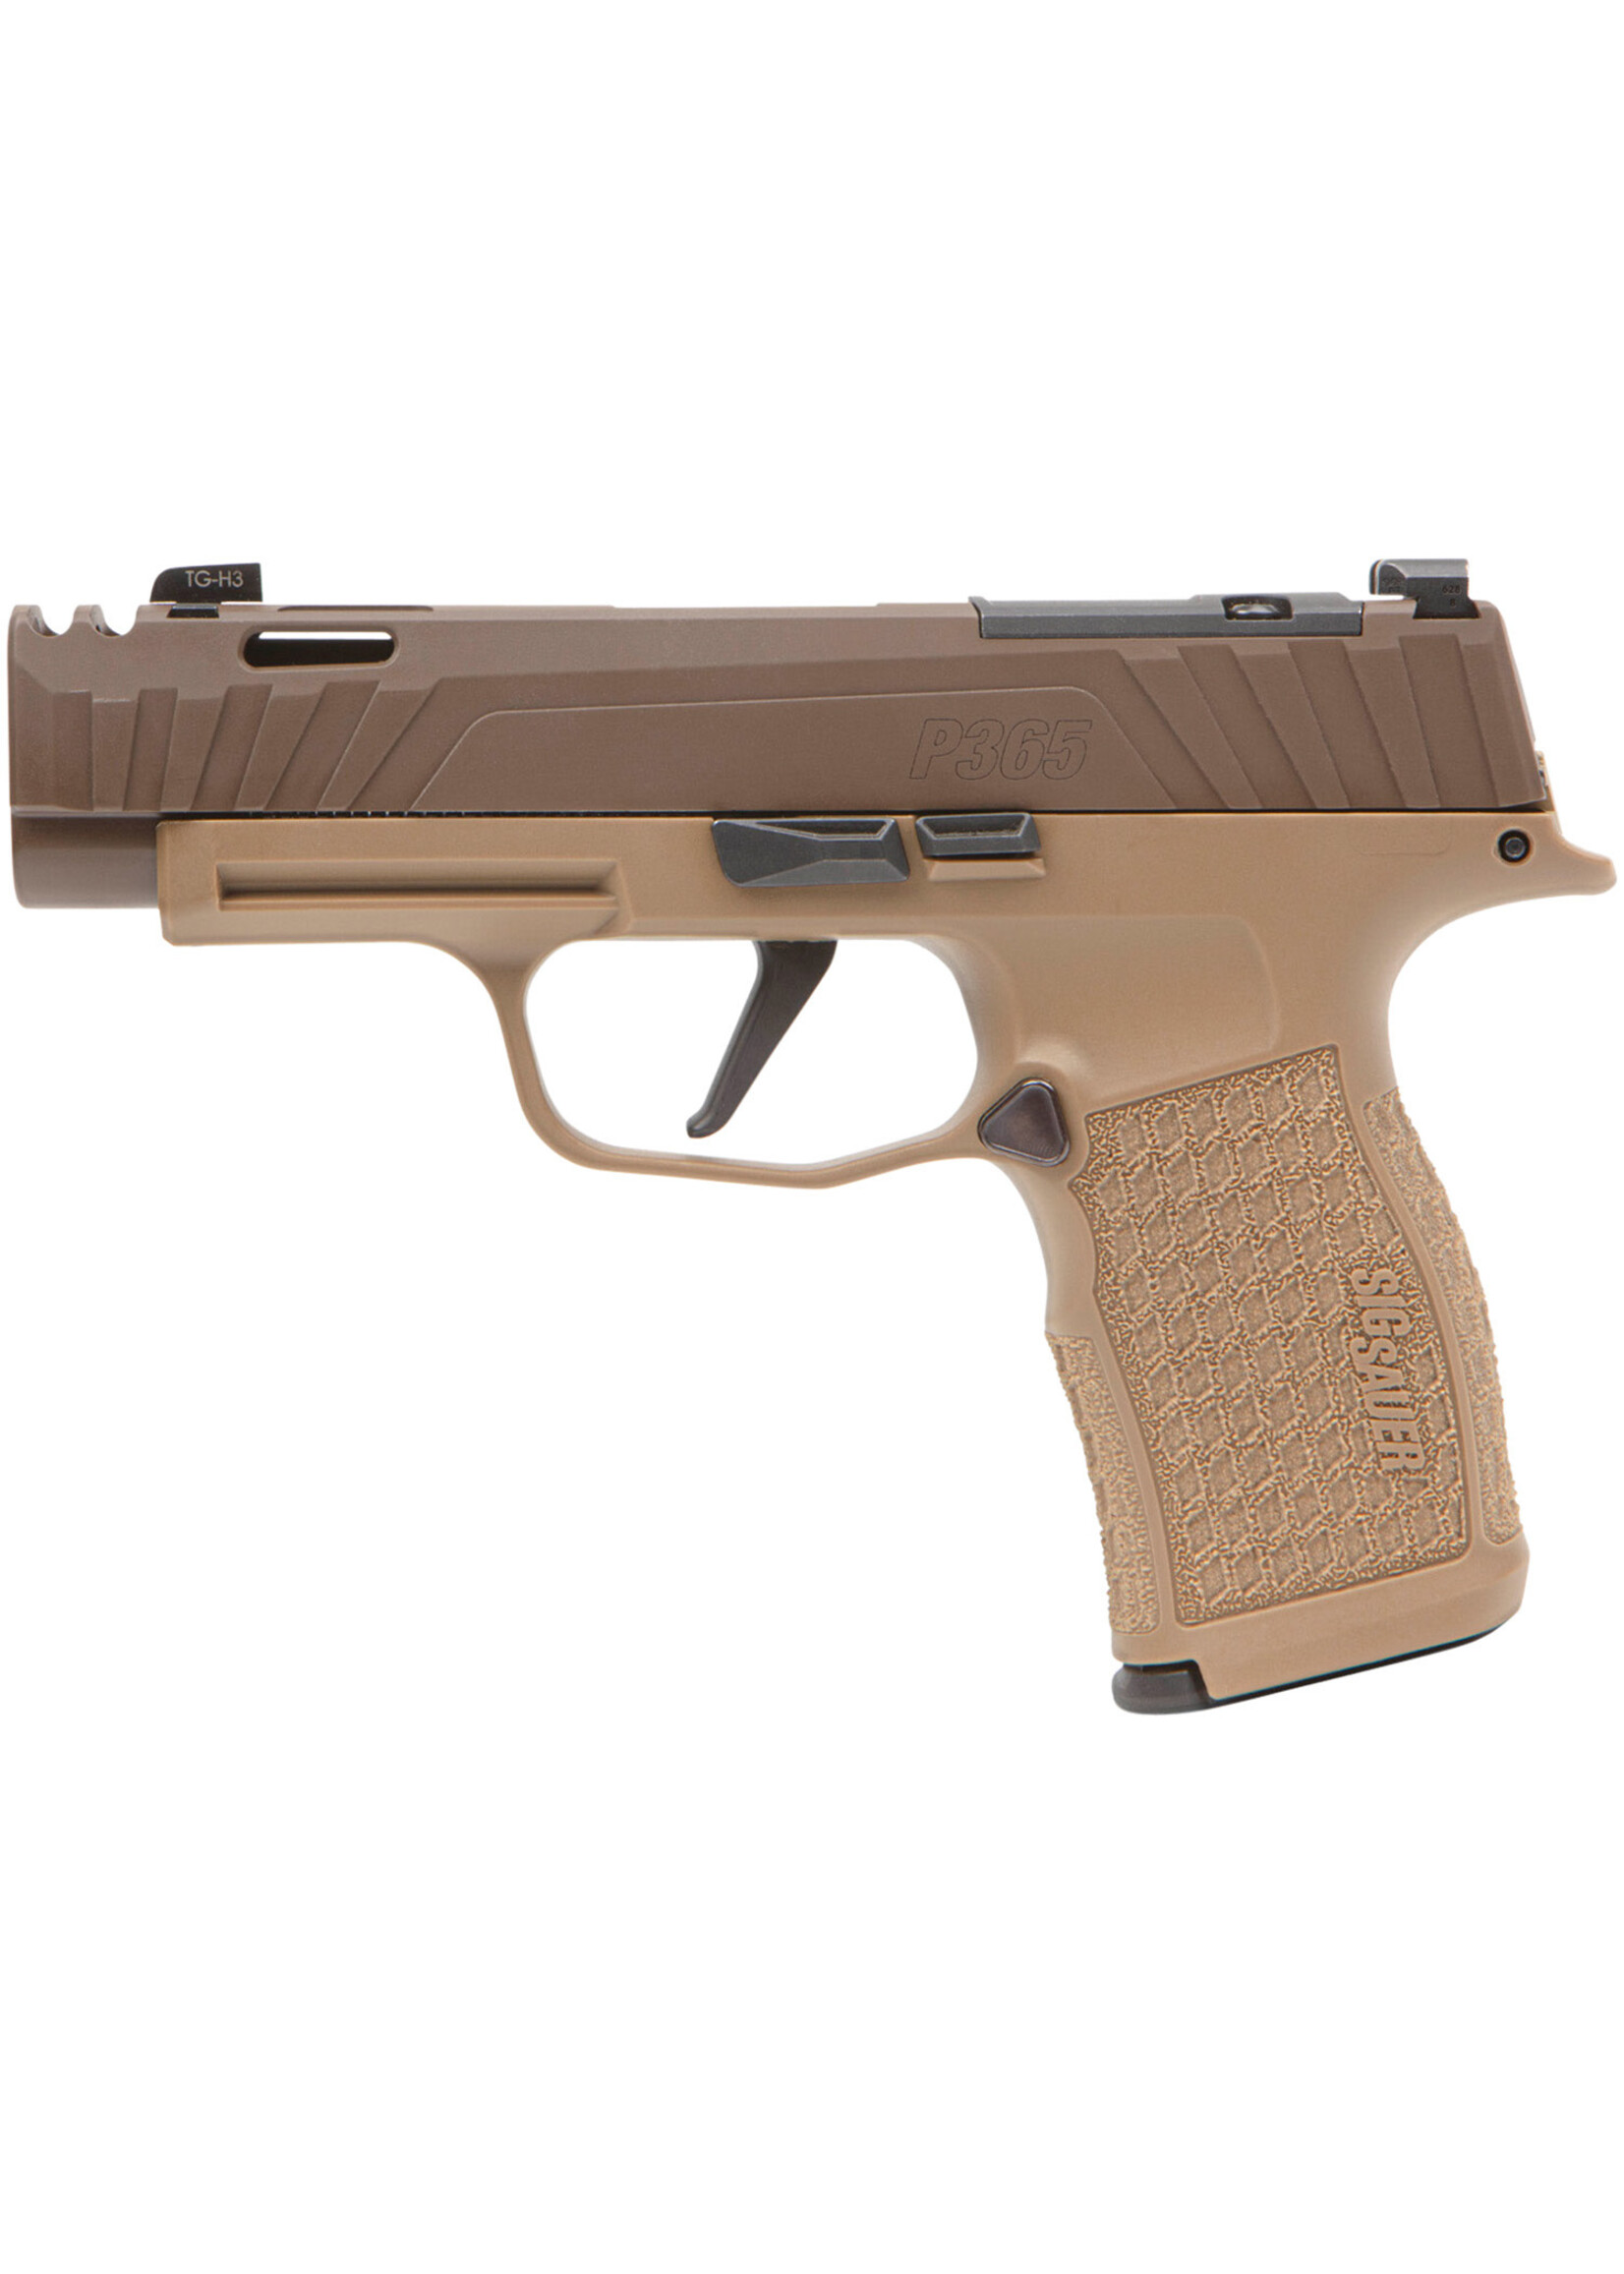 Sig Sauer Sig Sauer P365V005 P365XL Spectre Comp Full Size 9mm Luger 12+1/17+1 3.10" Black Nitride Carbon Steel Barrel, Coyote Cerakote Integrally Compensated/Optic Ready/Serrated Slide, Coyote Tan Stainless Steel Frame w/Picatinny Rail Coyote